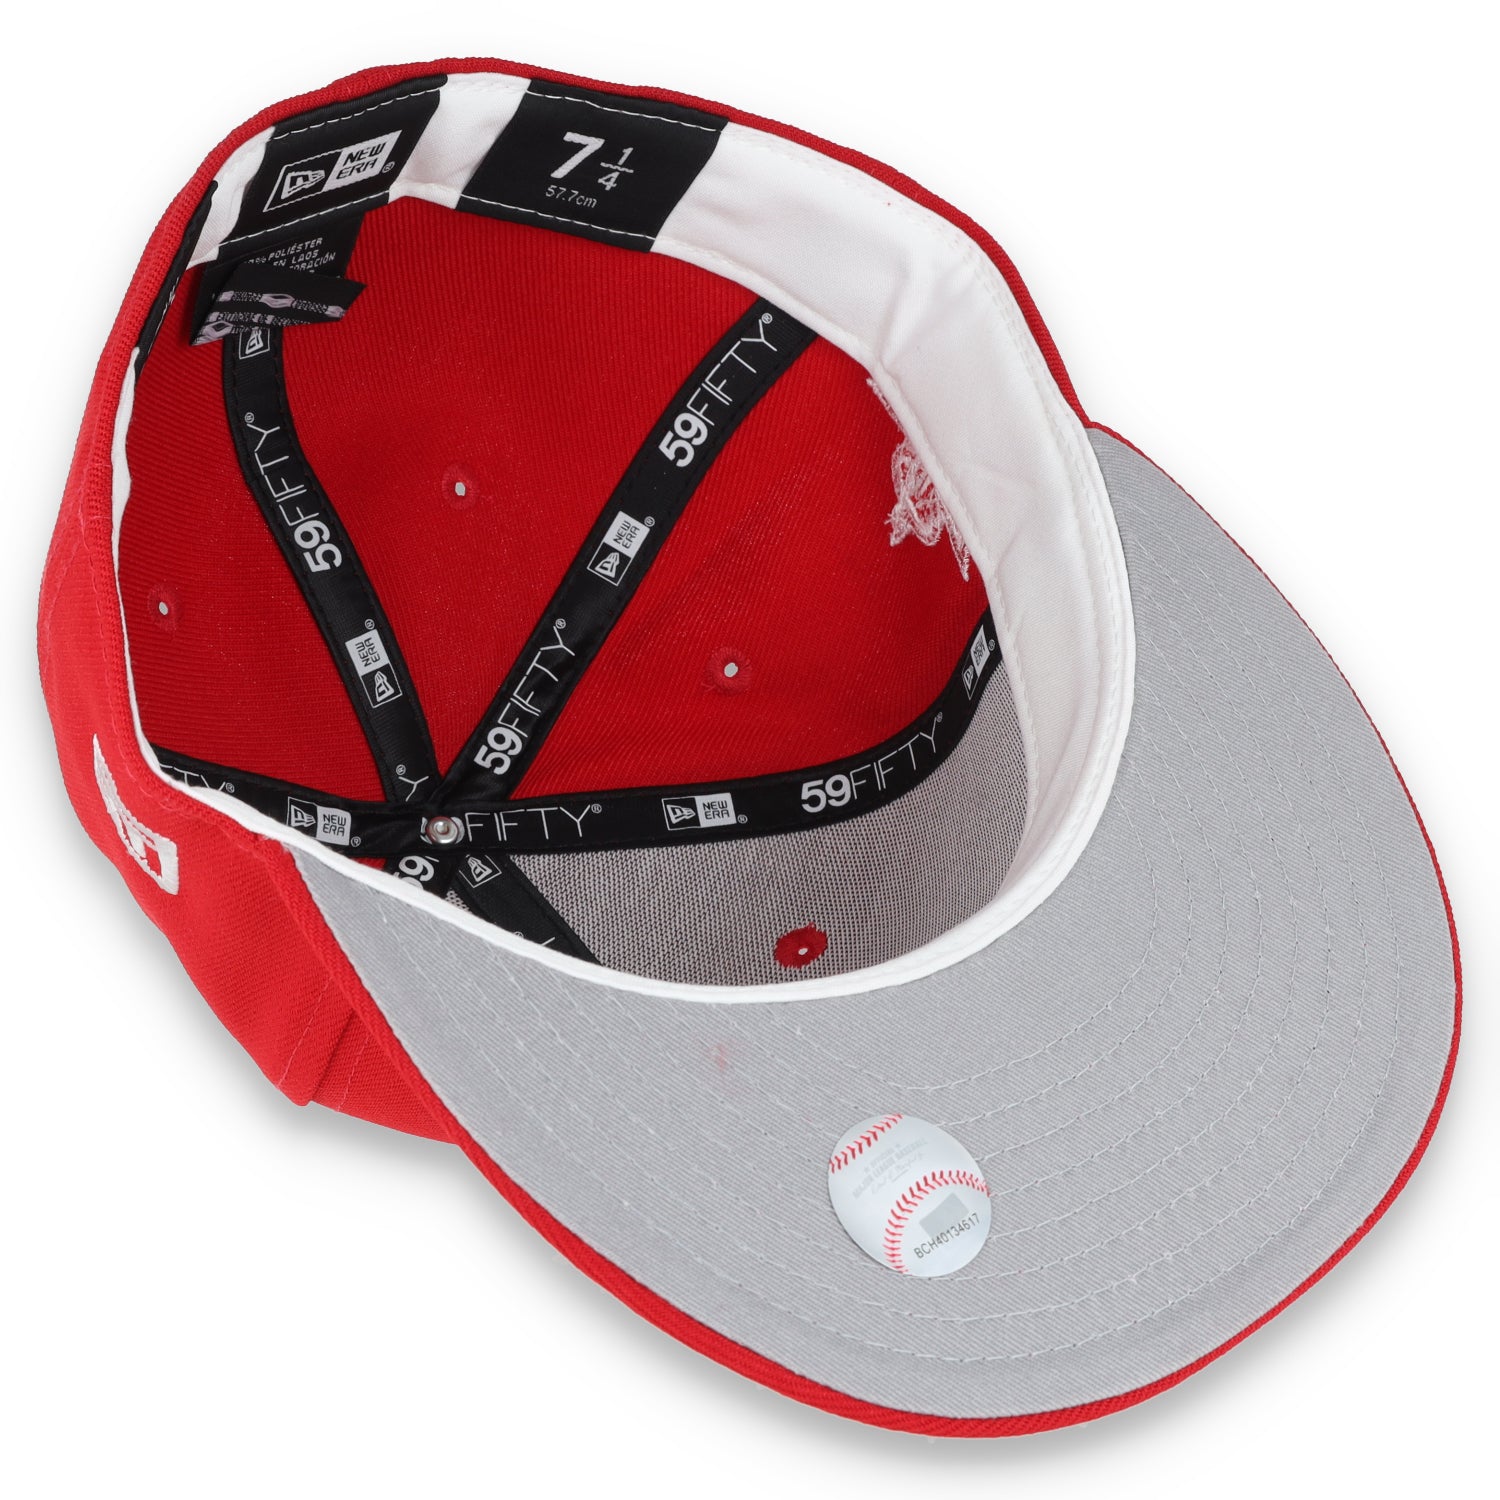 New Era Los Angels Angels 2010 MLB All Star Side Patch 59FIFTY Fitted Hat- Red/White